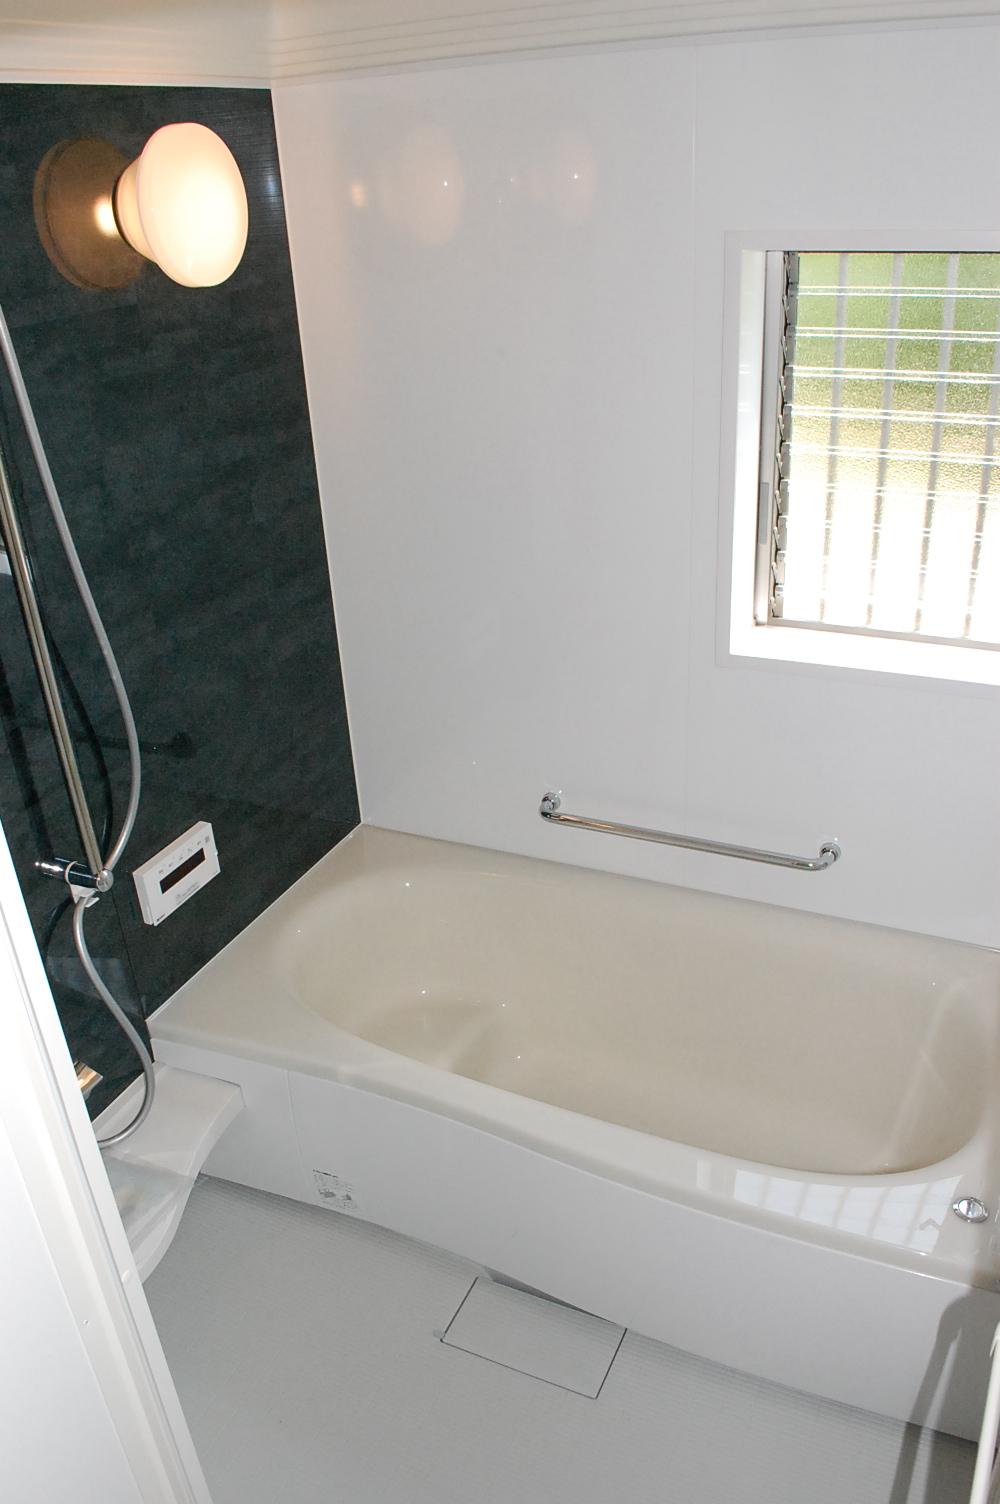 Bathroom. In unit bus of 1 pyeong type, It is the size that comfortably put in extending the leg. Thermos bathtub